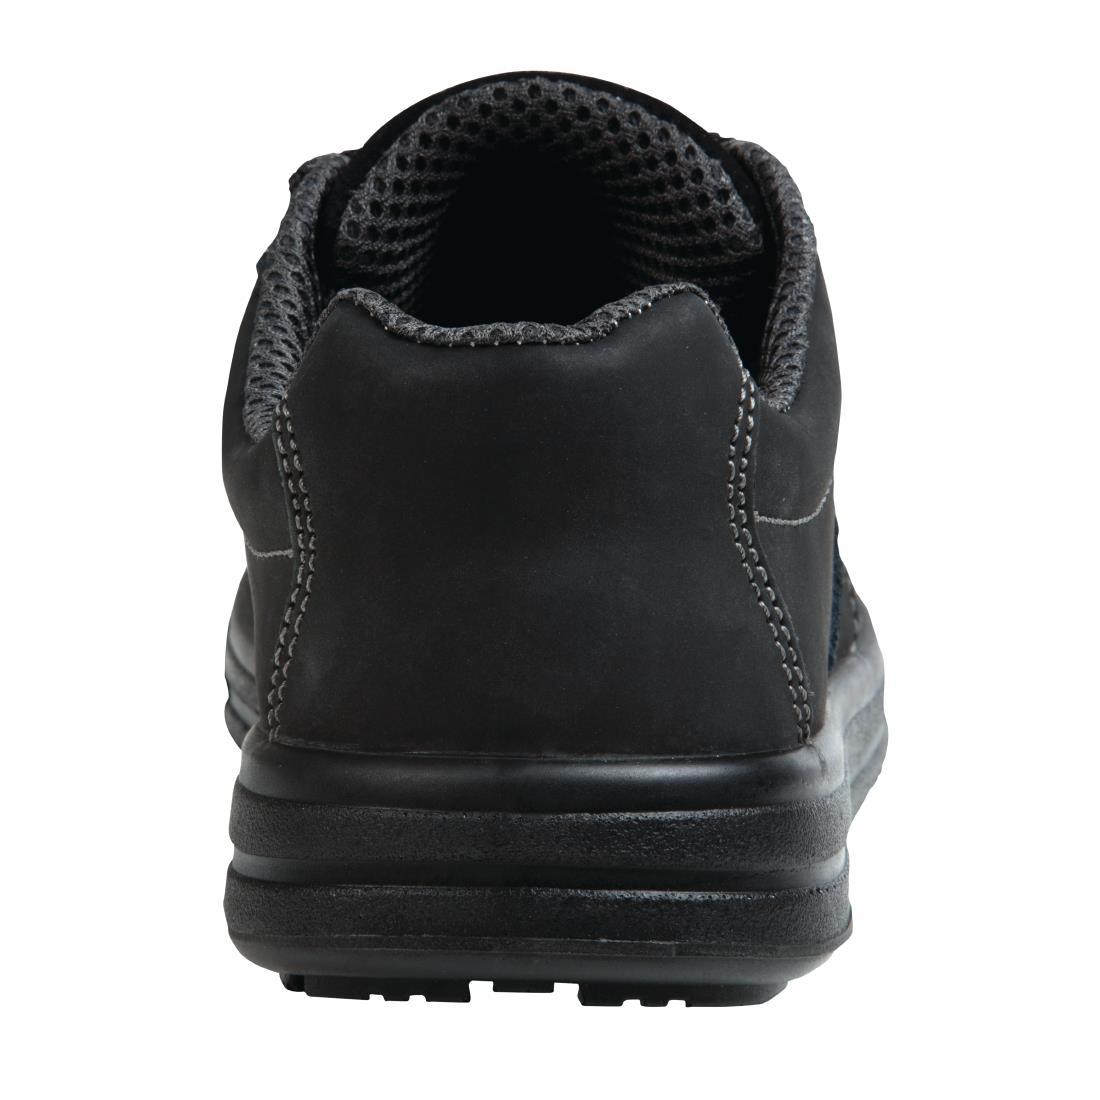 Slipbuster Safety Trainers Black 37 - BB420-37  - 4